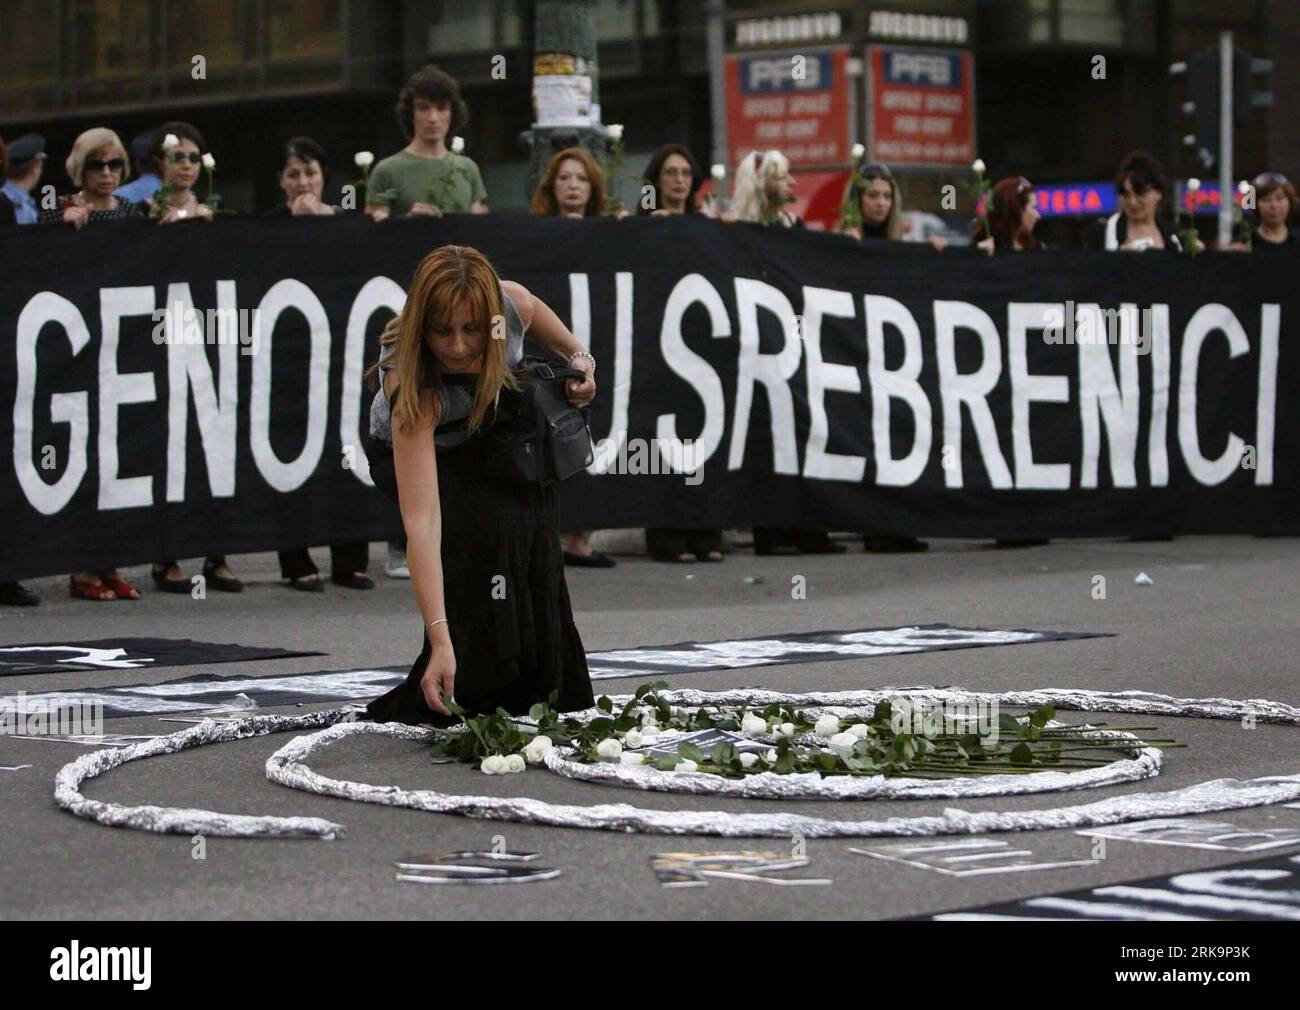 Bildnummer: 54220823  Datum: 10.07.2010  Copyright: imago/Xinhua (100710) -- BELGRADE, July 10, 2010 (Xinhua) -- Members of NGO Women in Black attend a protest in Belgrade, Serbia, July 10, 2010, on the eve of the 15th anniversary of the Srebrenica massacre in 1995 to raise public awareness of the war crimes. In July 1995, more than 8,000 Bosnian Muslim men and boys were massacred in Srebrenica by Bosnian Serb forces and a paramilitary unit from Serbia. The Srebrenica massacre is the largest mass murder in Europe since World War II. (Xinhua/Beta)(Serbia Out) (zw) (2)SERBIA-BELGRADE-PROTEST-SRE Stock Photo